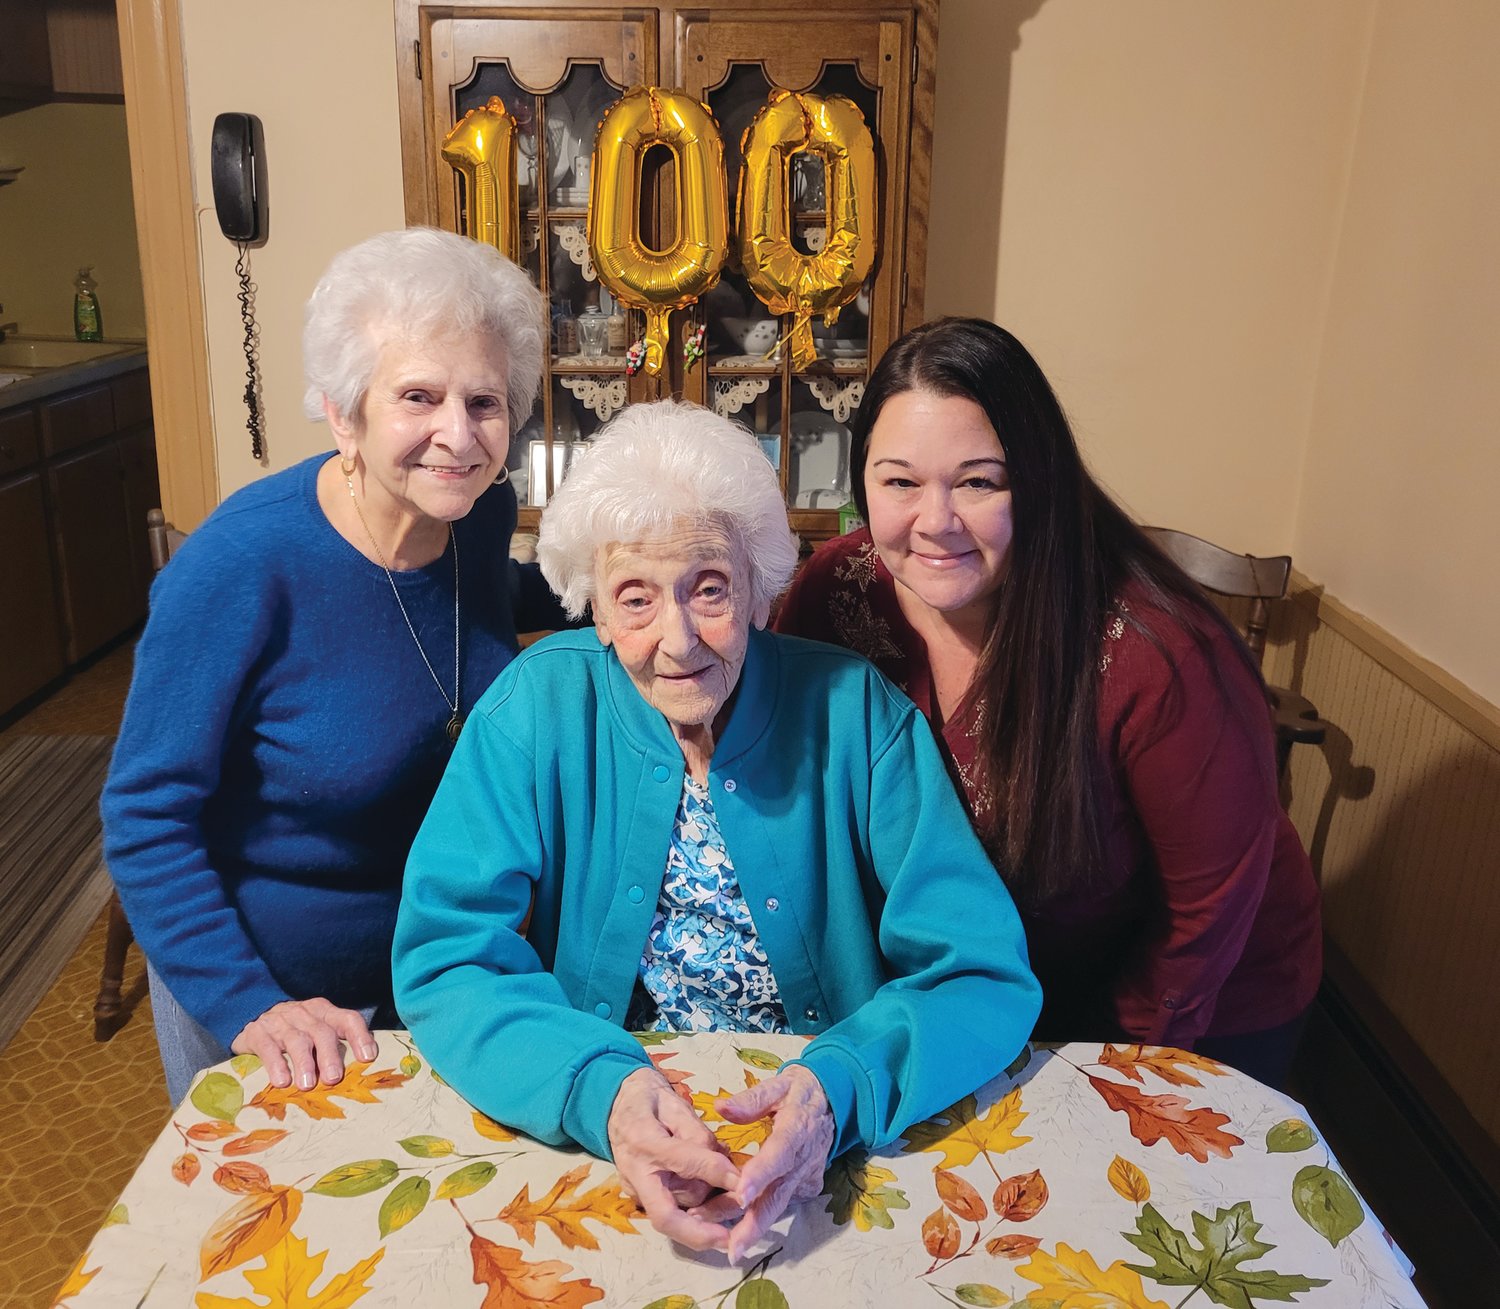 100 & COUNTING: Sister Alice Macera, birthday girl Josephine “Josie” Celentano, and great niece Lisa DiSarro, pose for a birthday photo the day after Josie's 100th birthday party.